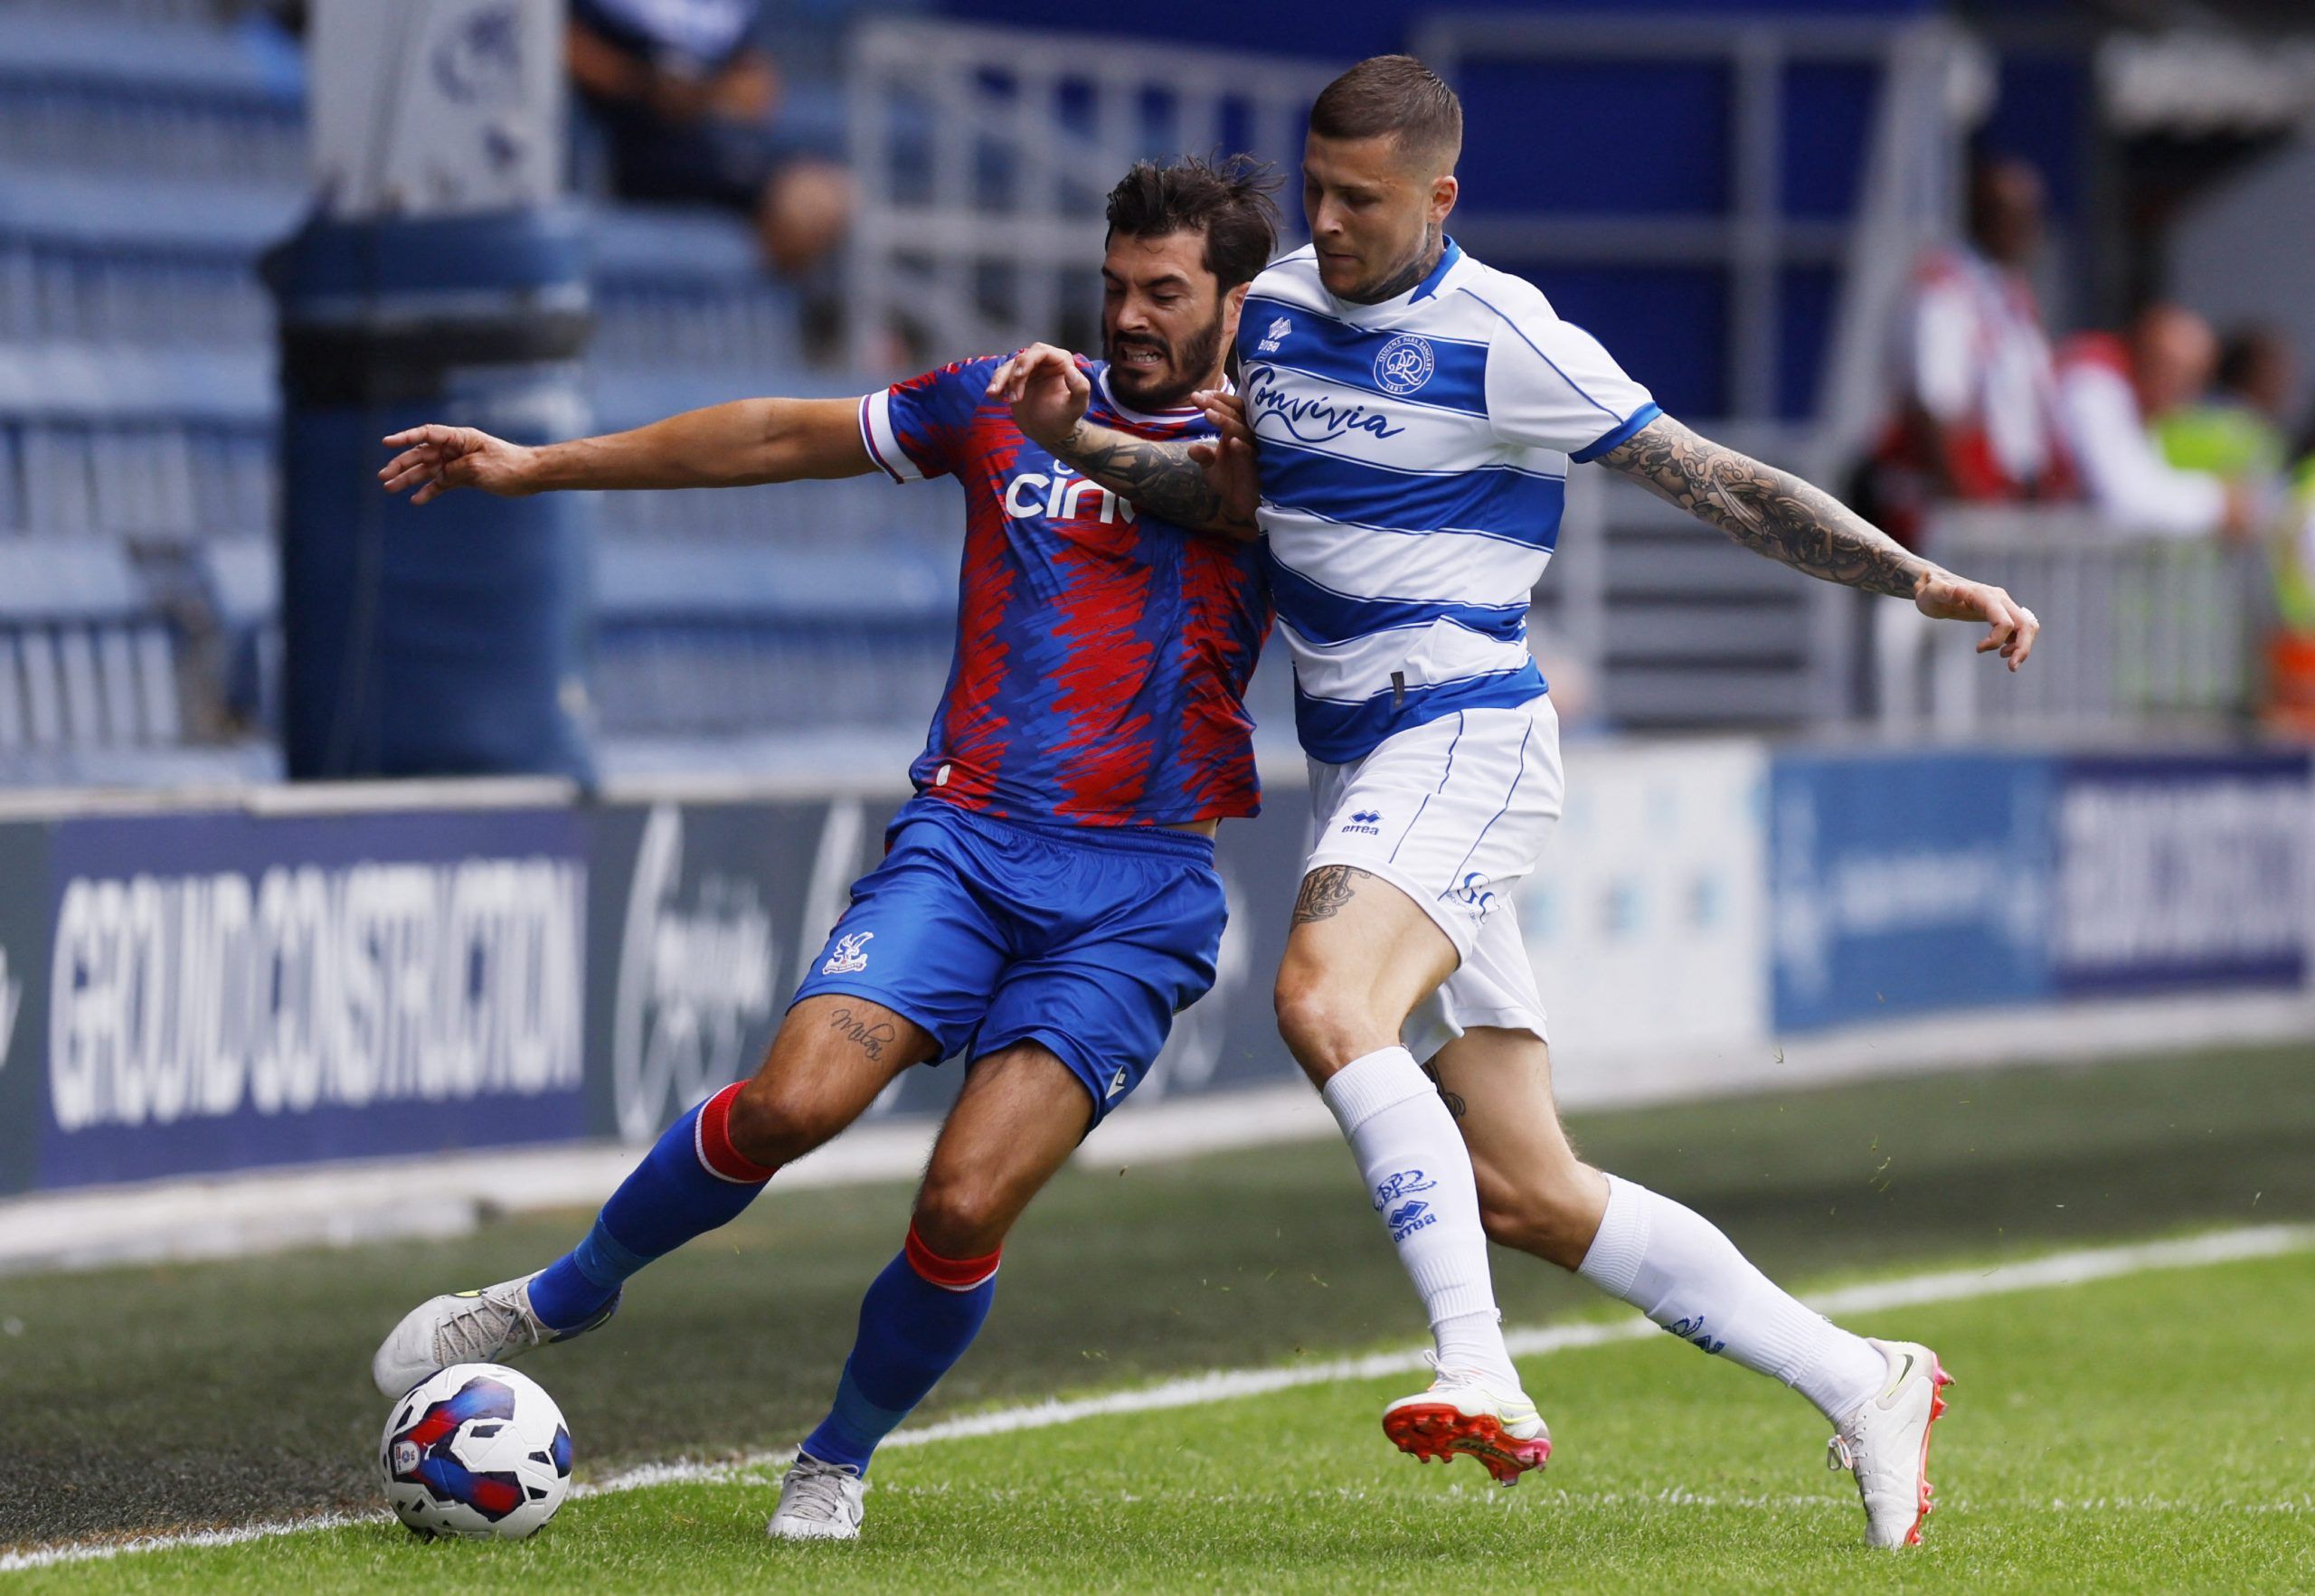 Soccer Football - Pre Season Friendly - Queens Park Rangers v Crystal Palace - Loftus Road, London, Britain - July 23, 2022 Queens Park Rangers' Lyndon Dykes in action with Crystal Palace's James Tomkins Action Images via Reuters/Andrew Couldridge